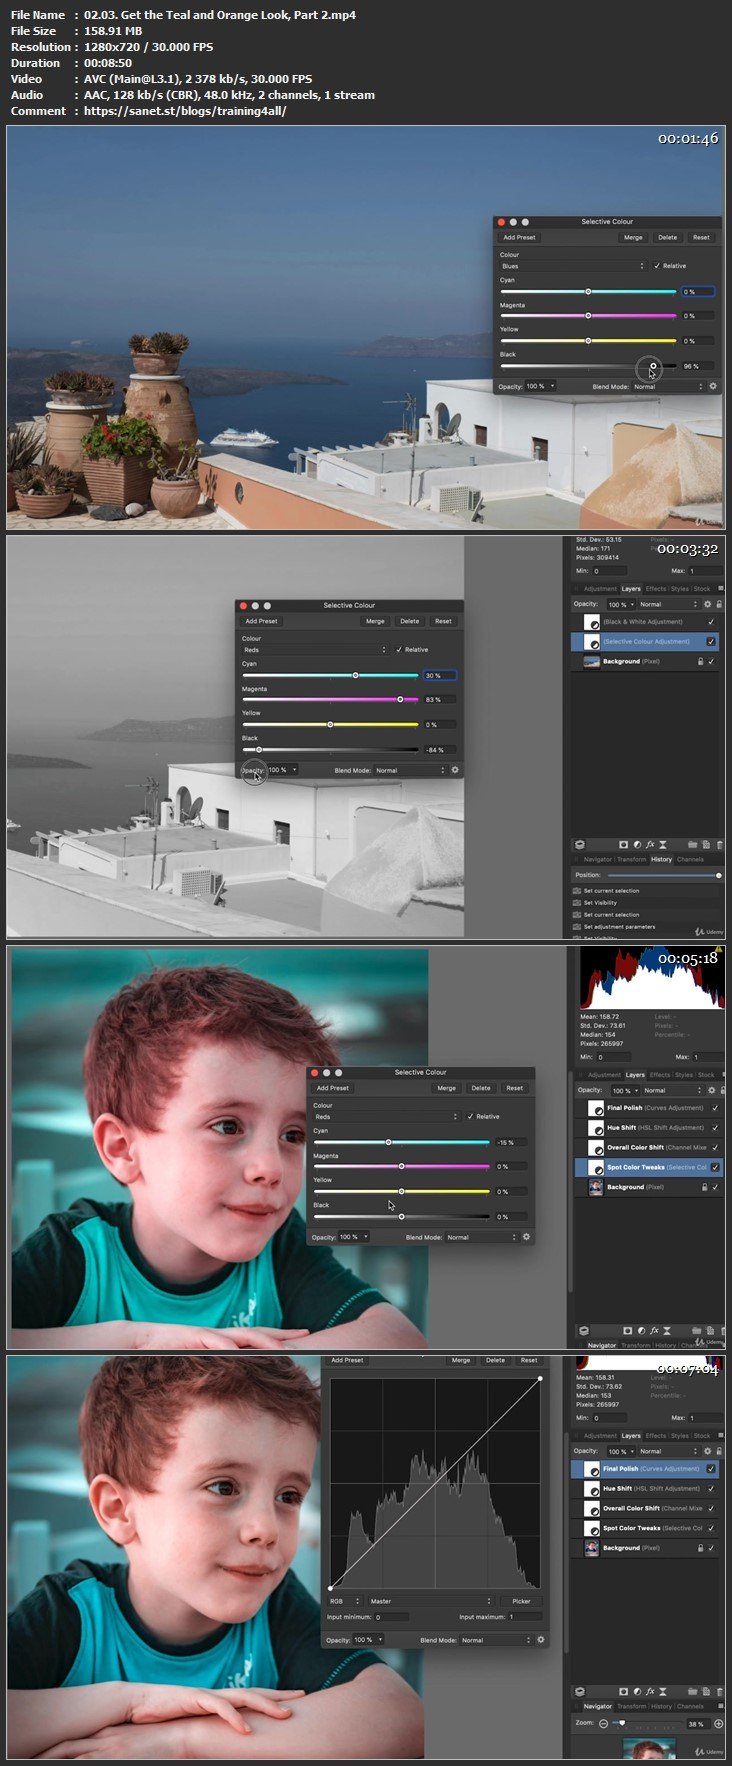 affinity photo effects panel not seen